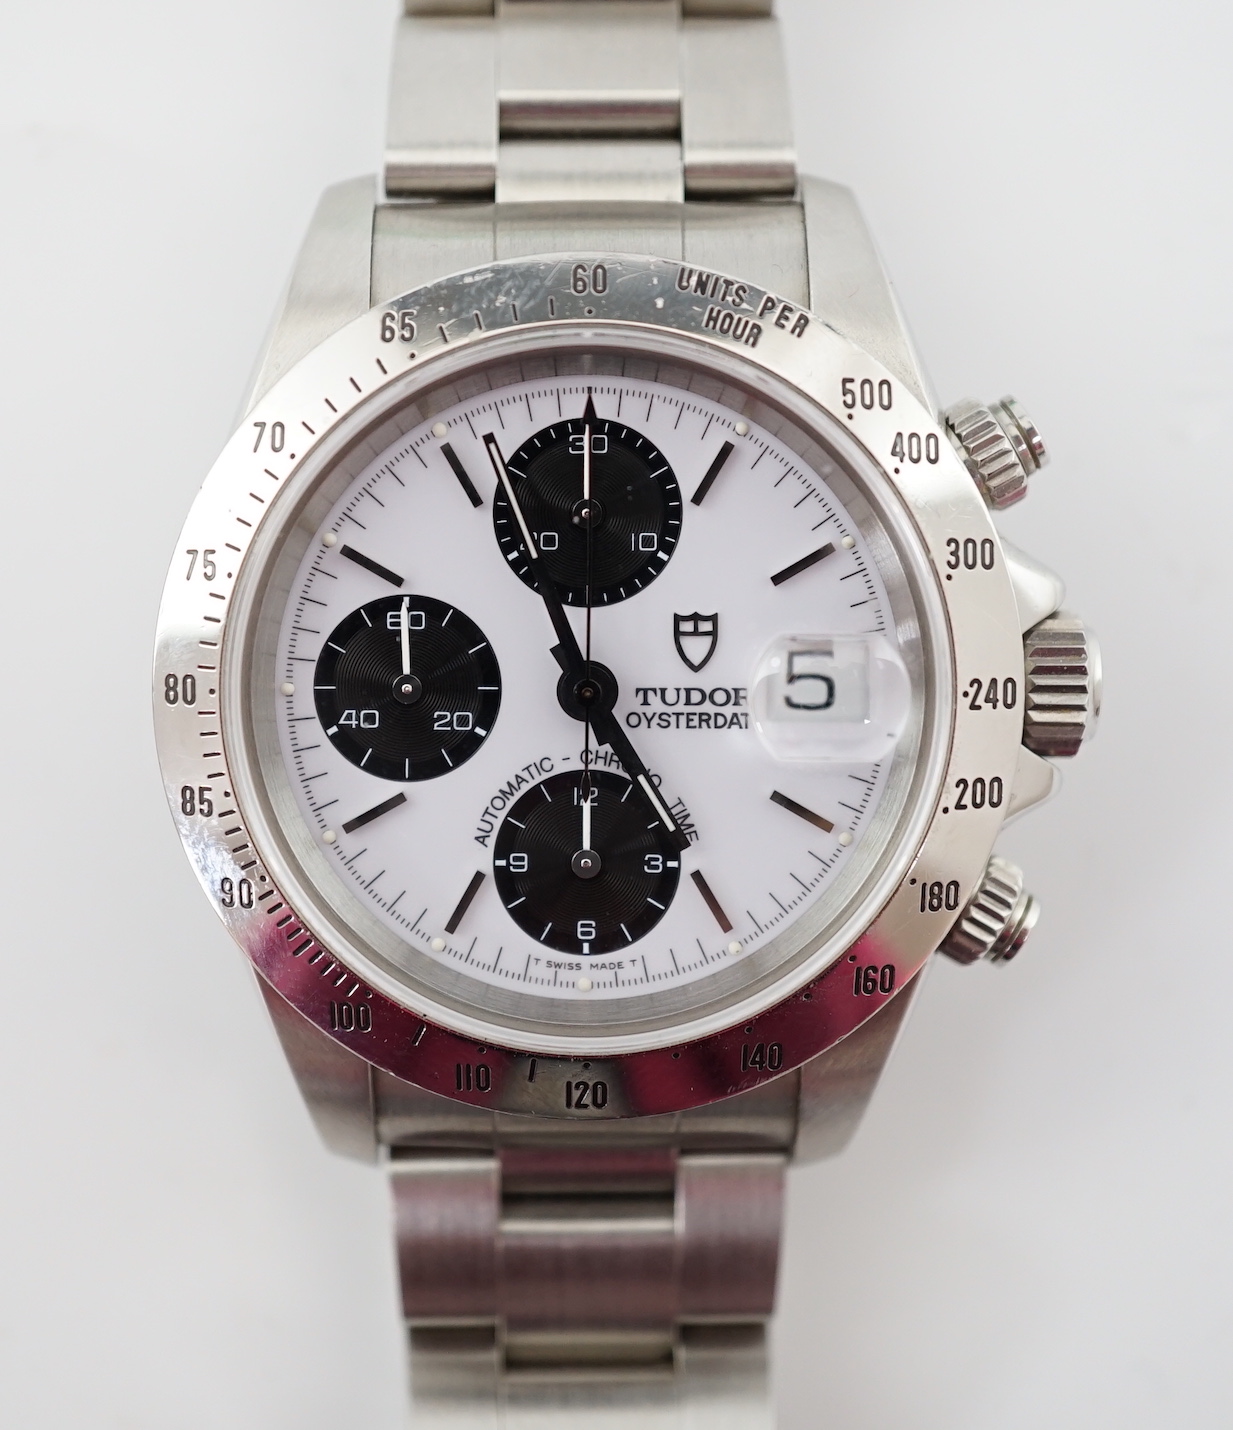 A gentleman's 2002 stainless steel Tudor Oysterdate Automatic Chrono Time 'Big Block' panda dial wrist watch